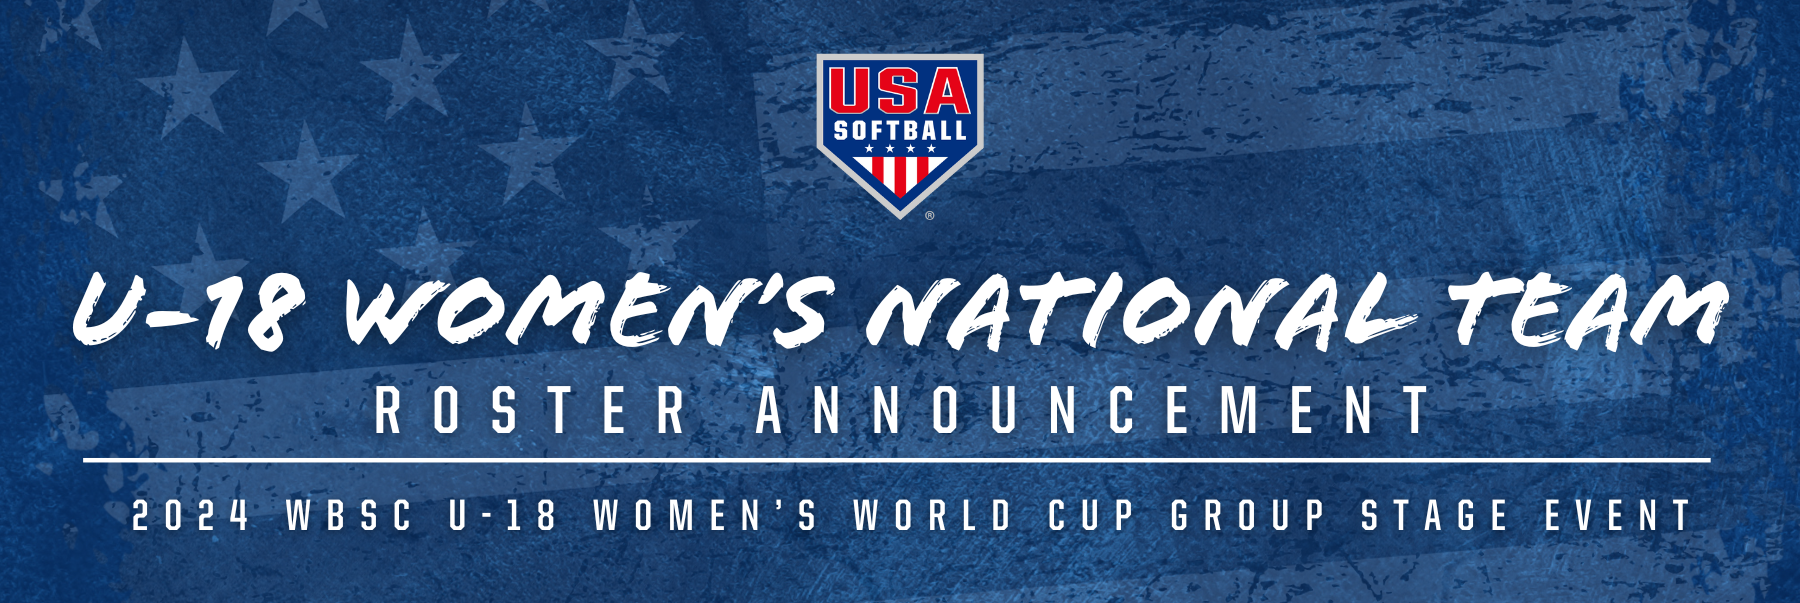 USA Softball names U-18 Women’s National Team roster; 16 athletes advance through the HPP to represent the Team USA on international stage featured image